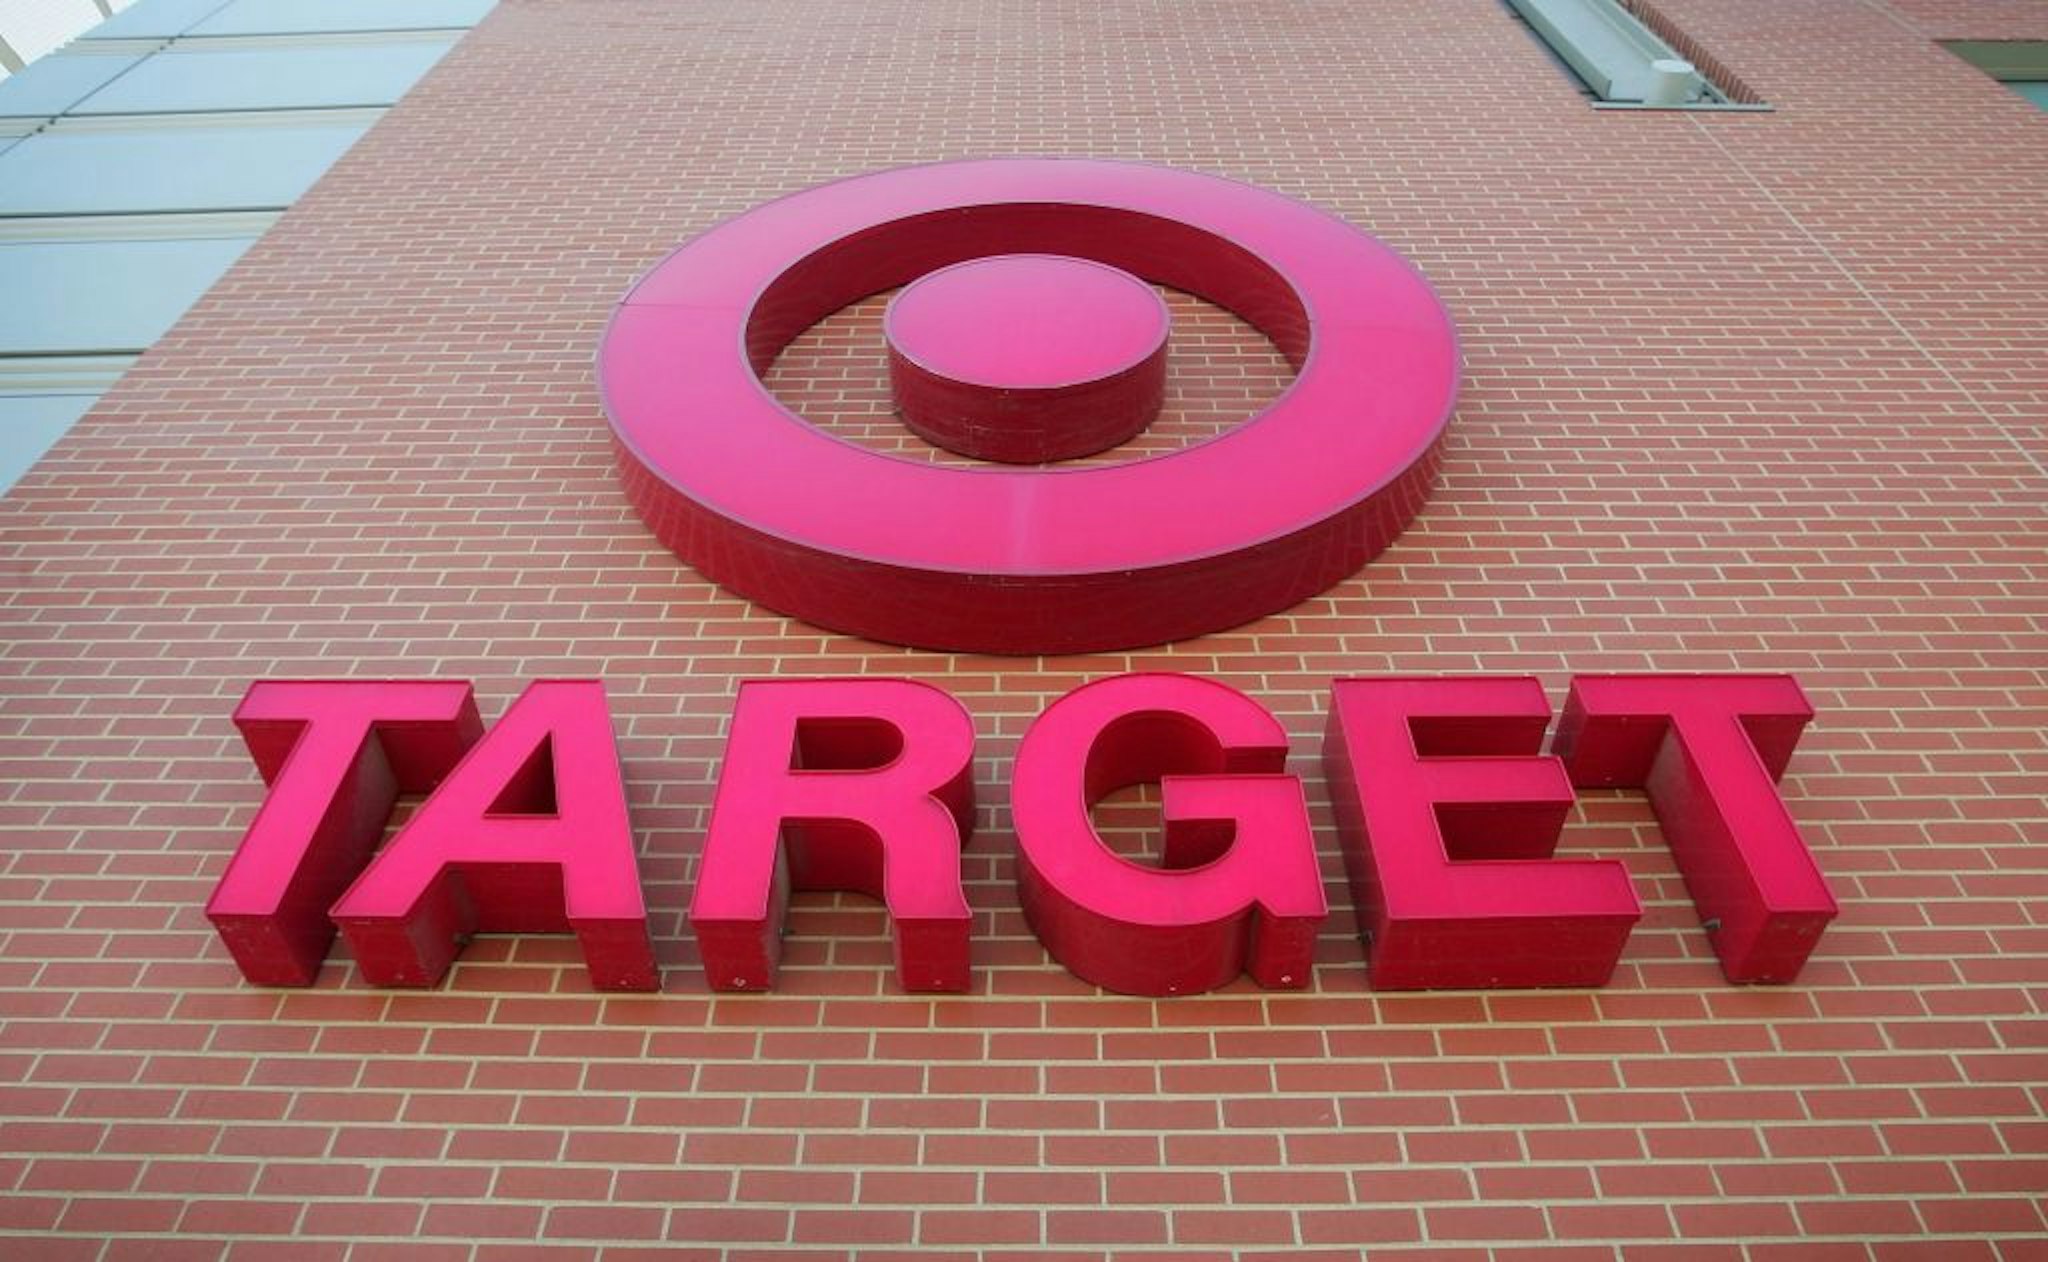 CHICAGO - JULY 18: A sign is seen on the exterior of a Target store July, 18, 2006 in Chicago, Illinois. Heightened concerns that energy prices are slowing consumer spending helped to drag shares of Target down today for their biggest one-day percentage slide in eight months.